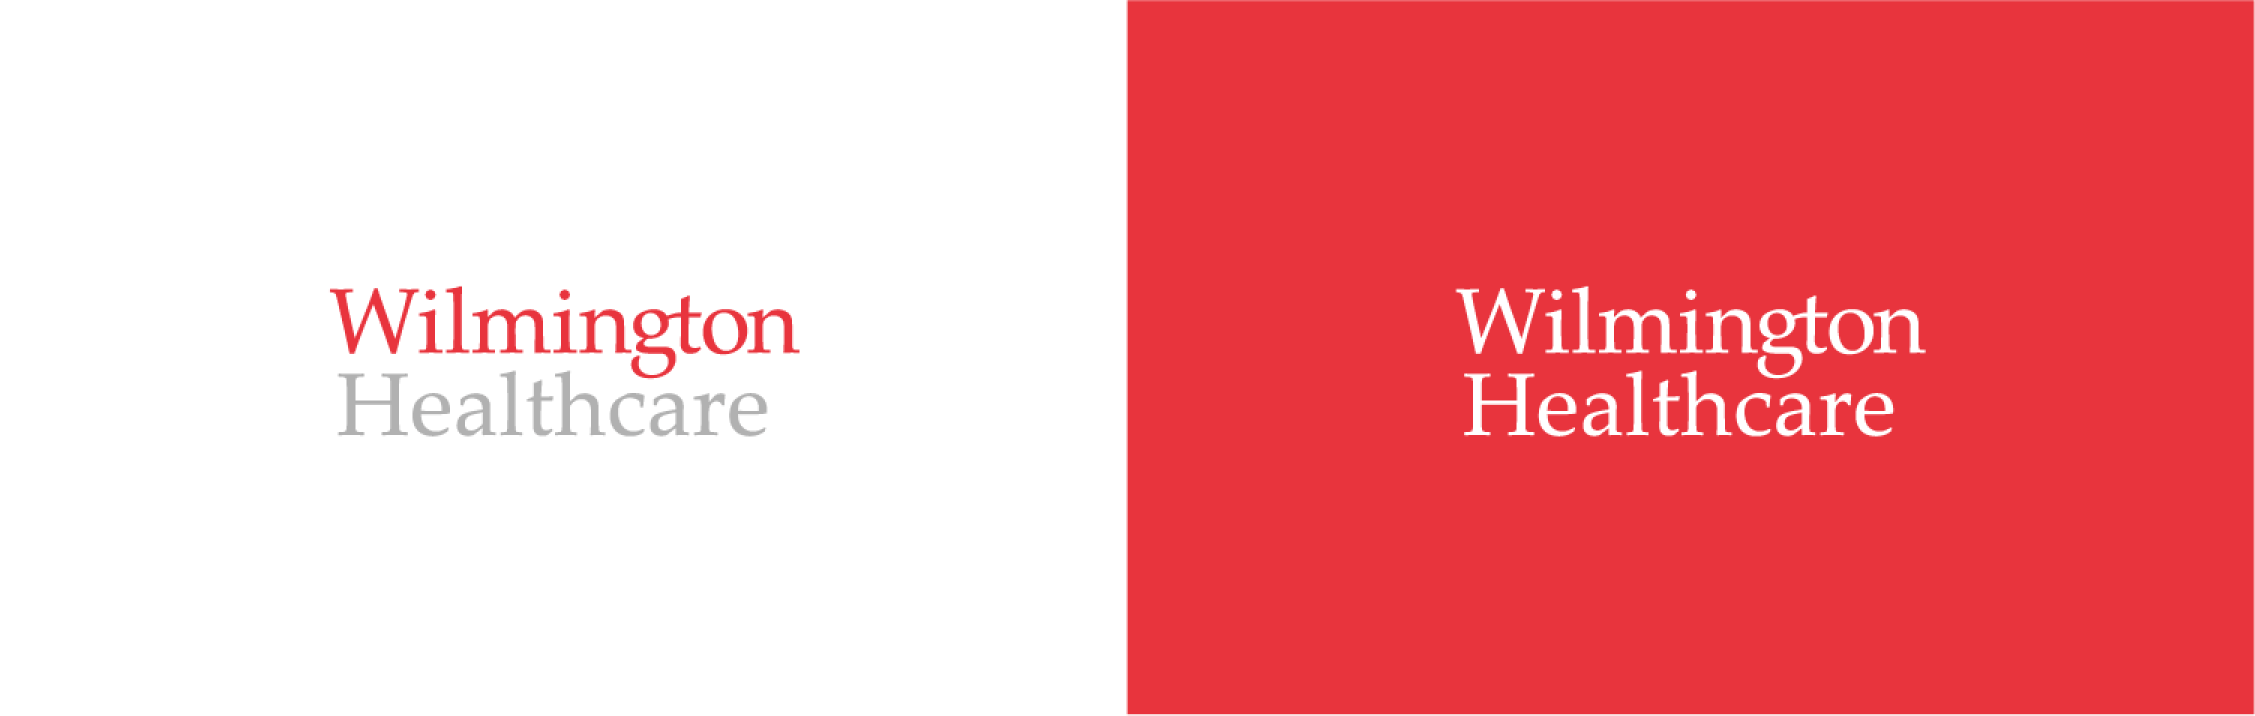 Wilmington Healthcare logo on white and a negative version on a red background